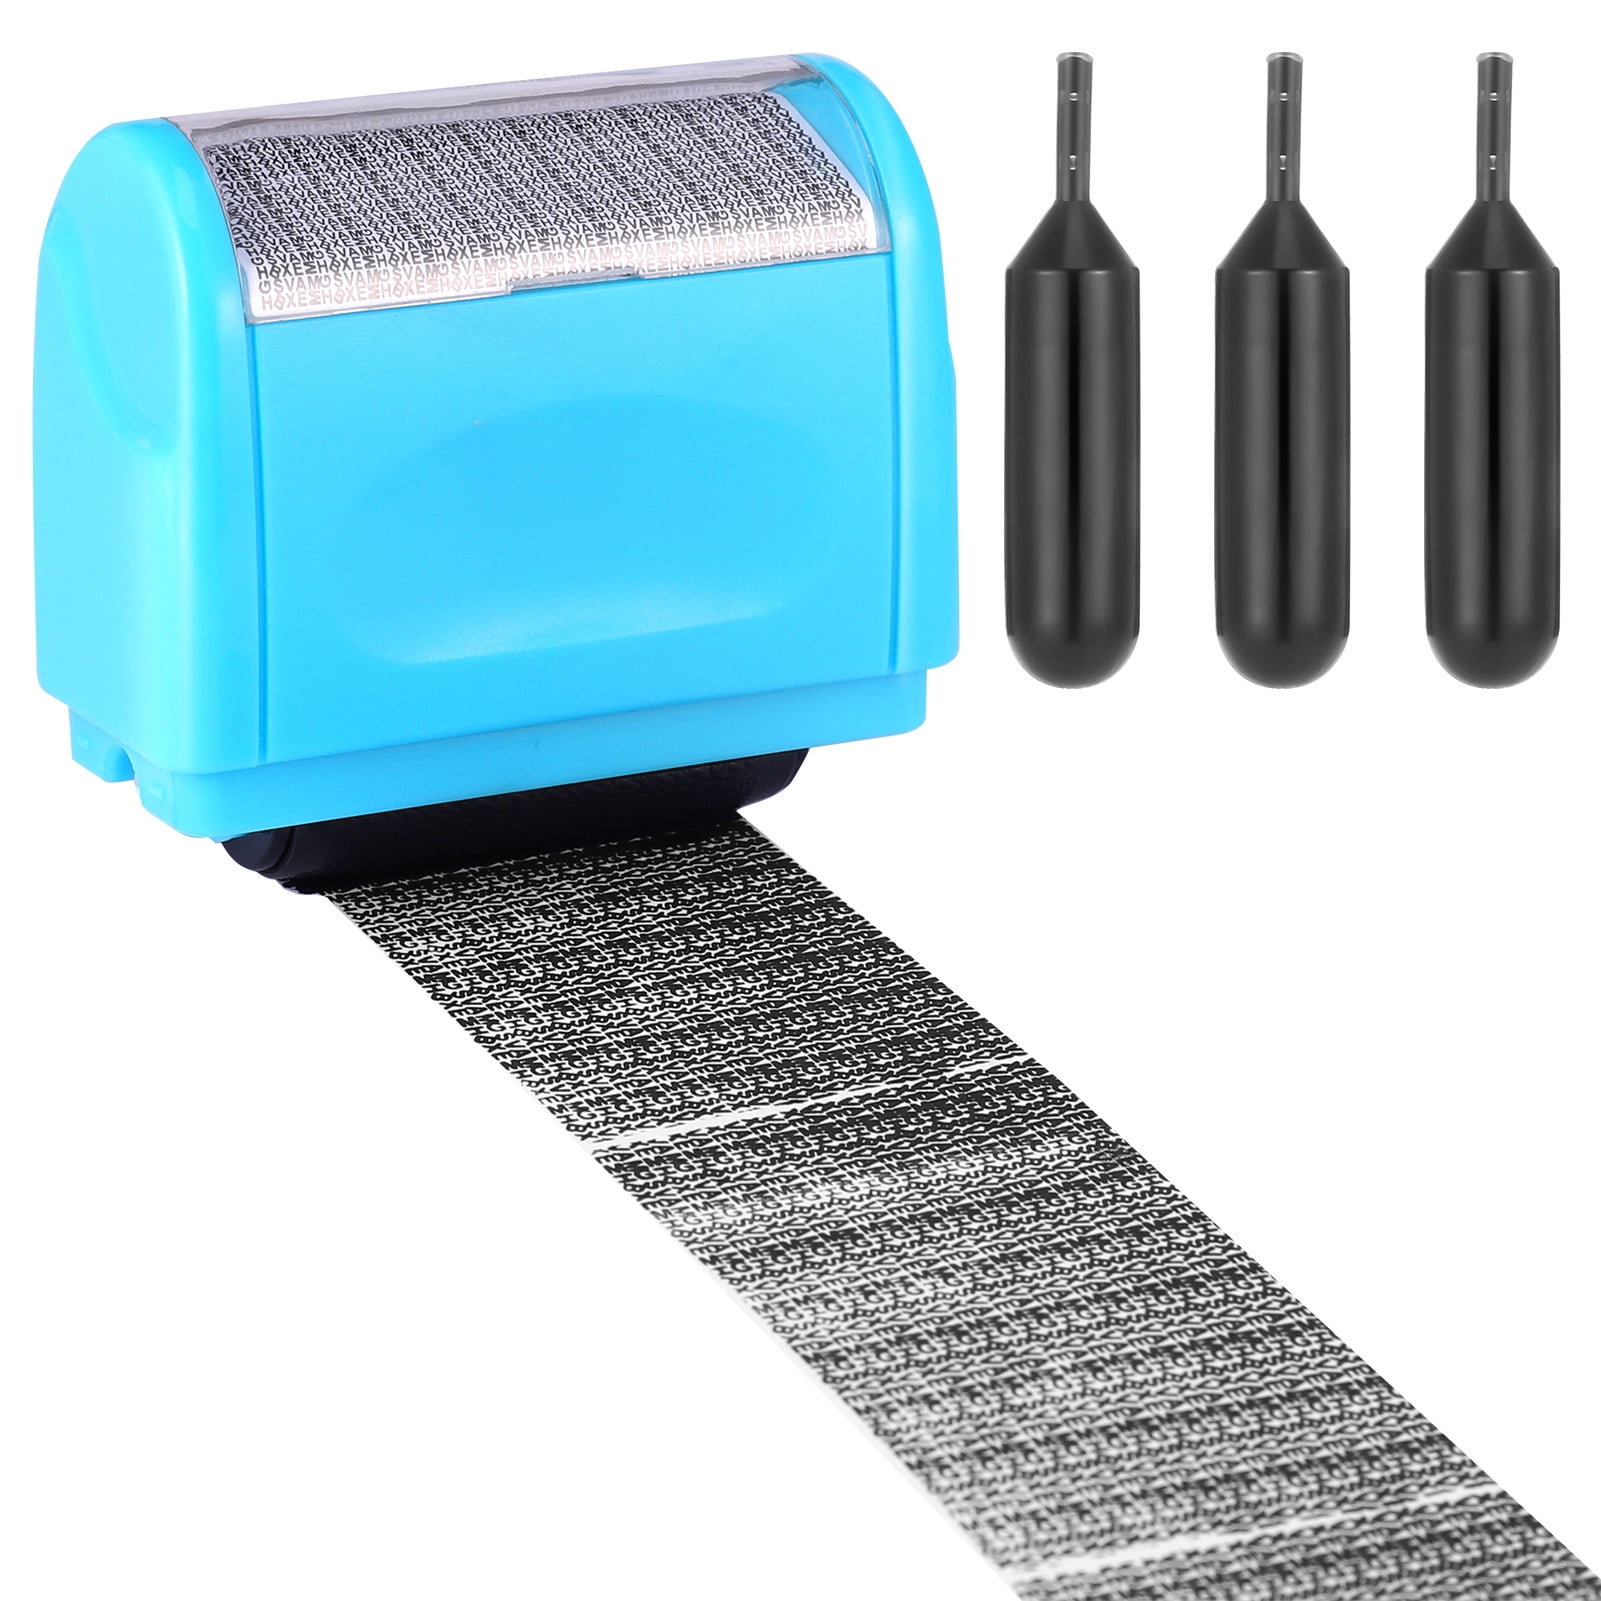 AHIER Identity Protection Roller Stamps Included 6 Pack Refills Ink for Identity Address Blockout Privacy Protection Blue 